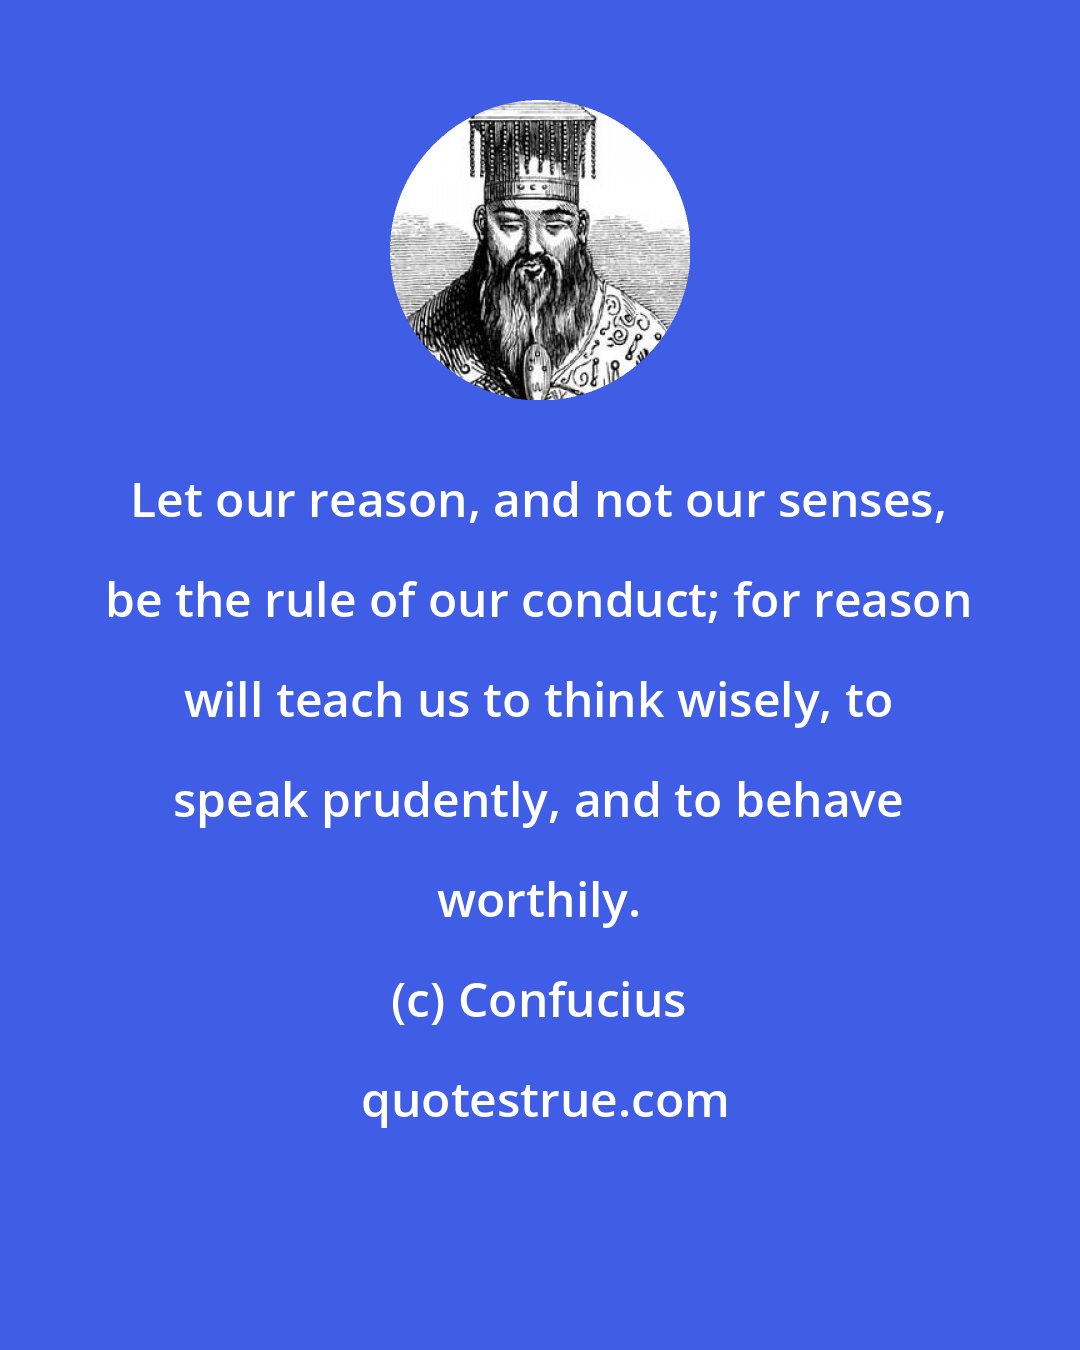 Confucius: Let our reason, and not our senses, be the rule of our conduct; for reason will teach us to think wisely, to speak prudently, and to behave worthily.